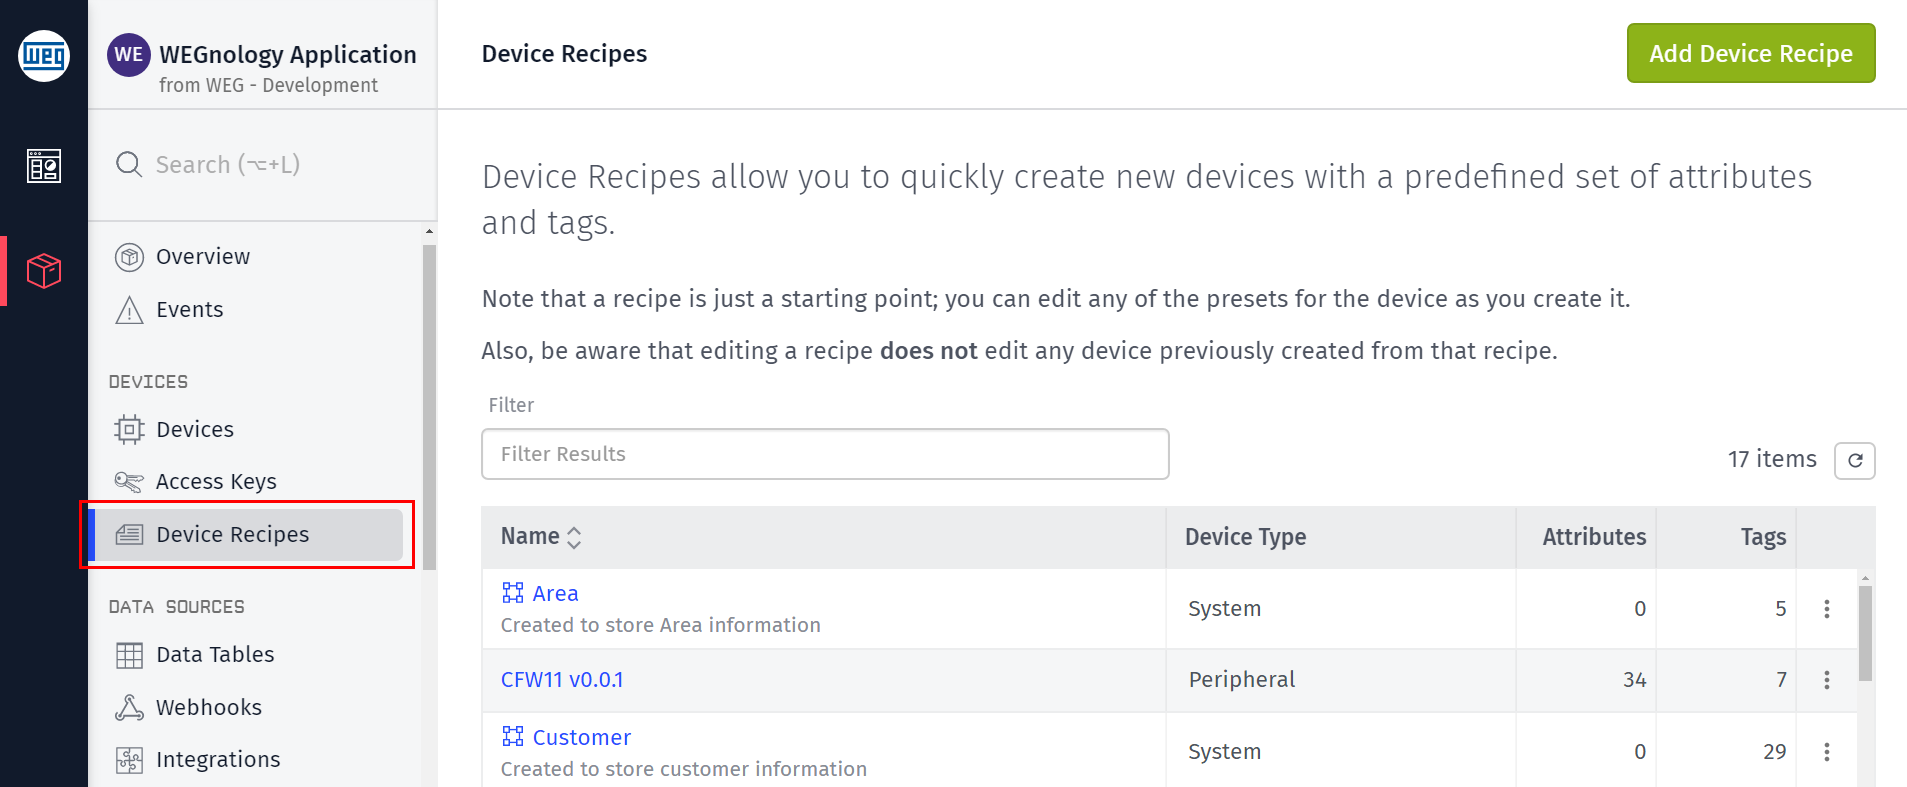 Device Recipe Overview